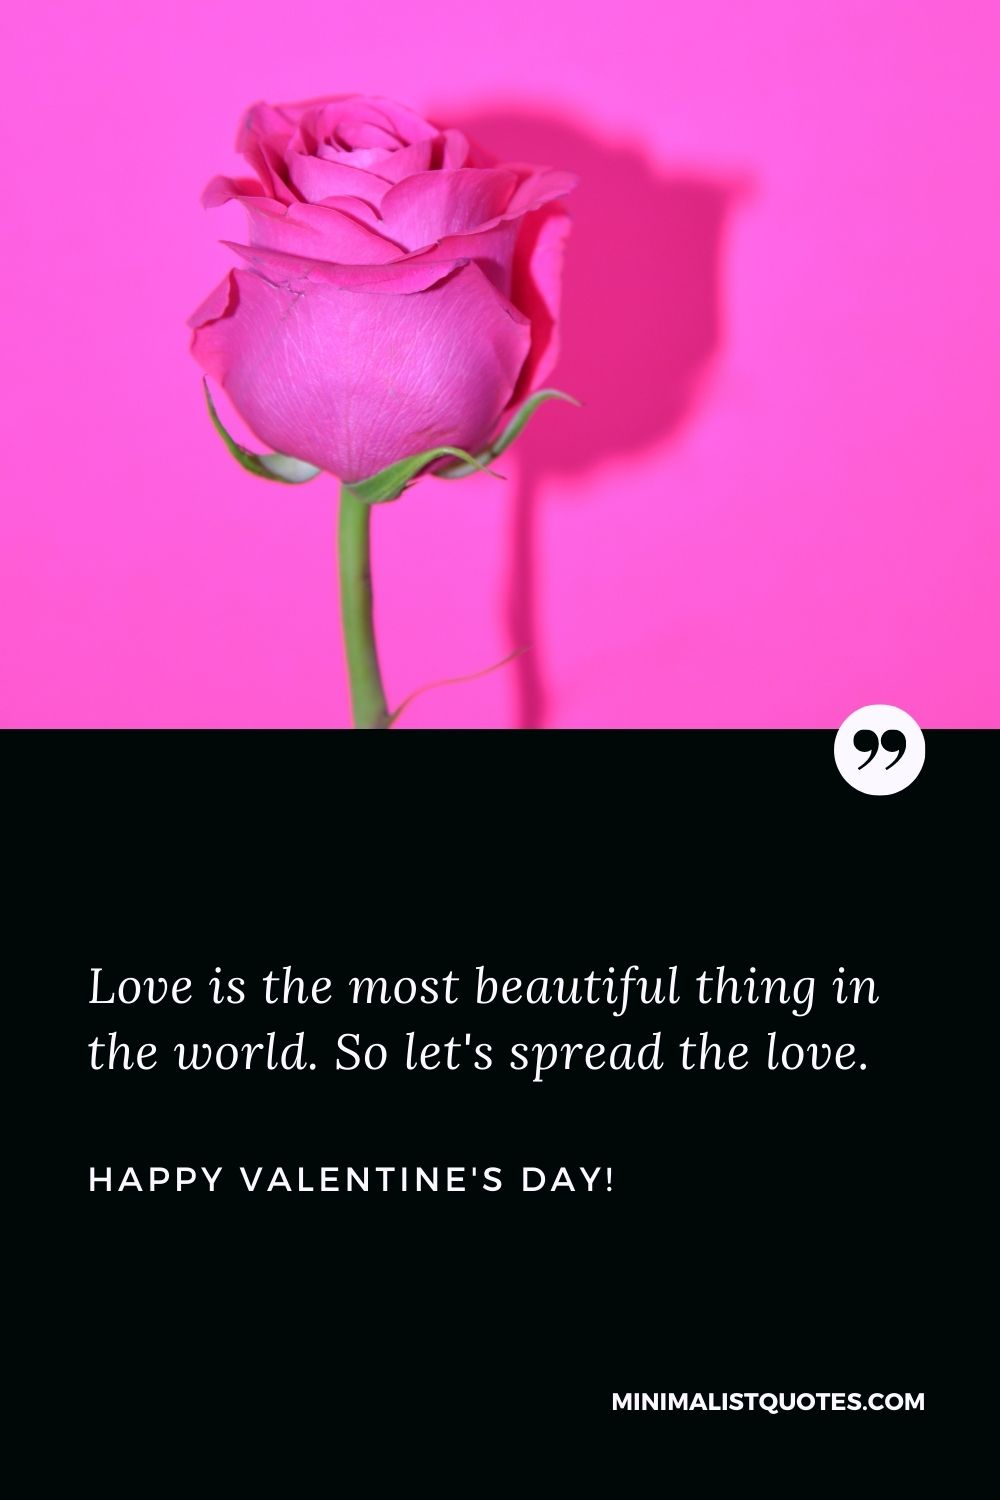 Love is the most beautiful thing in the world. So let's spread the ...